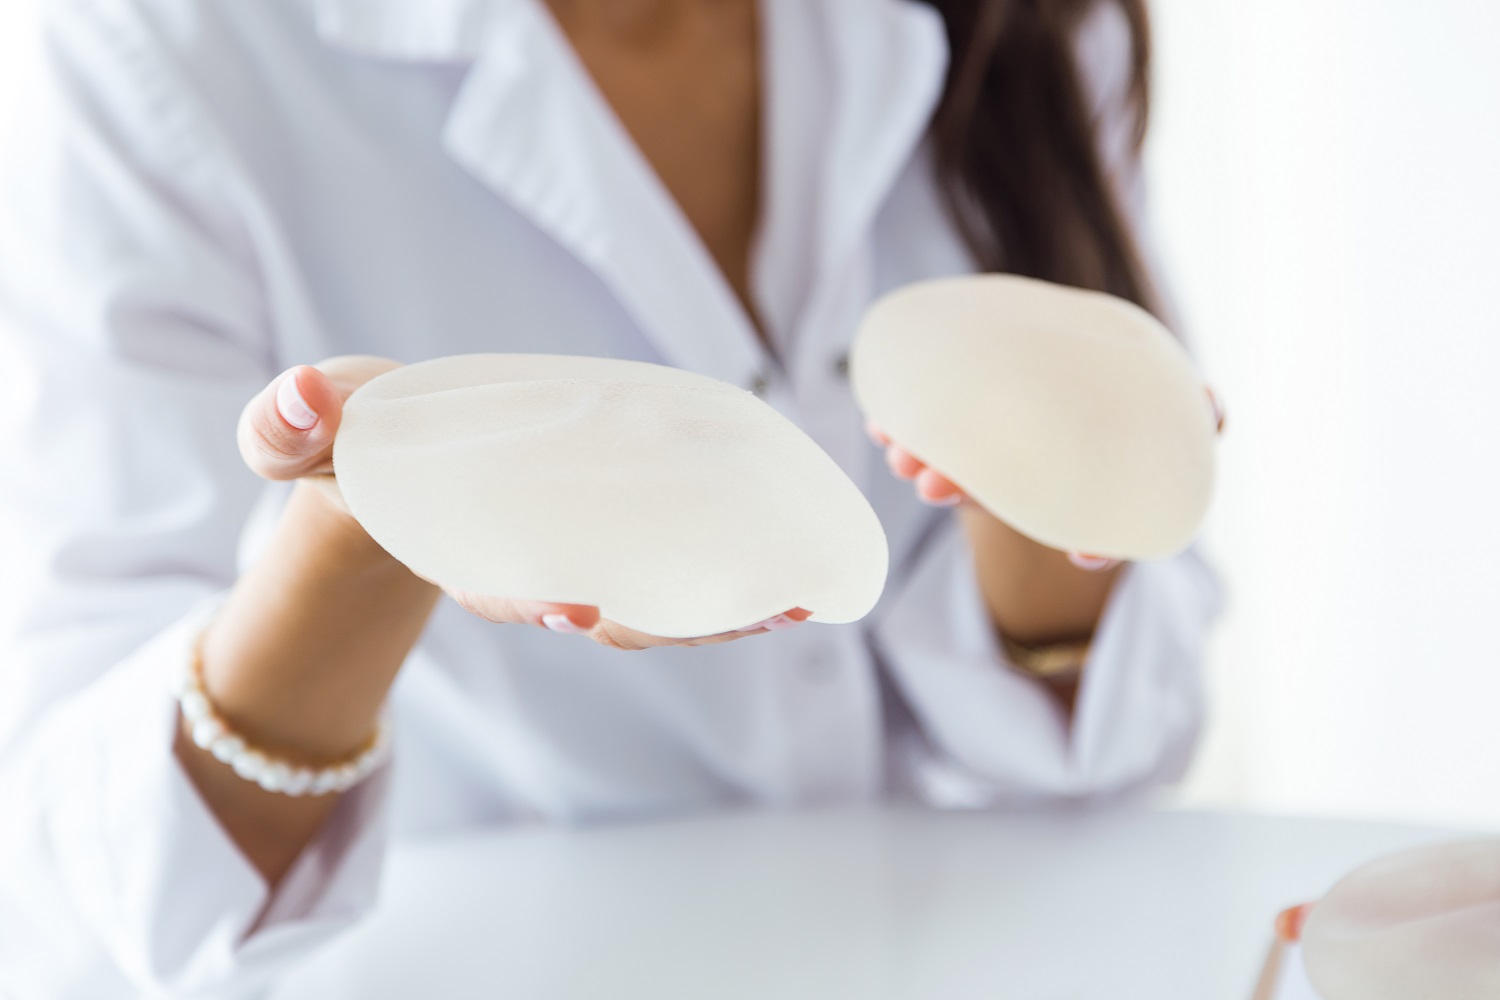 Types of breast implants